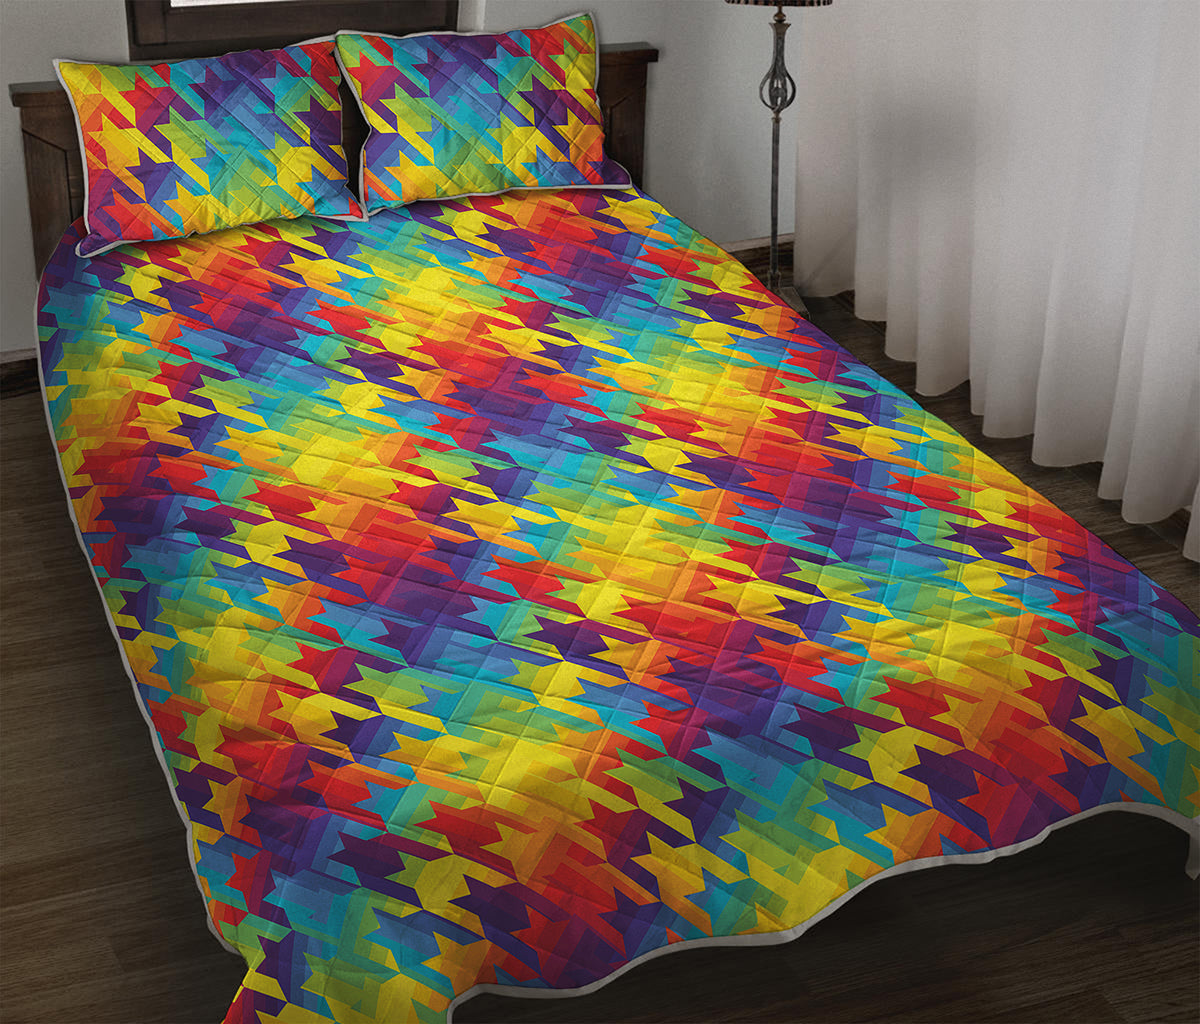 Rainbow Houndstooth Pattern Print Quilt Bed Set